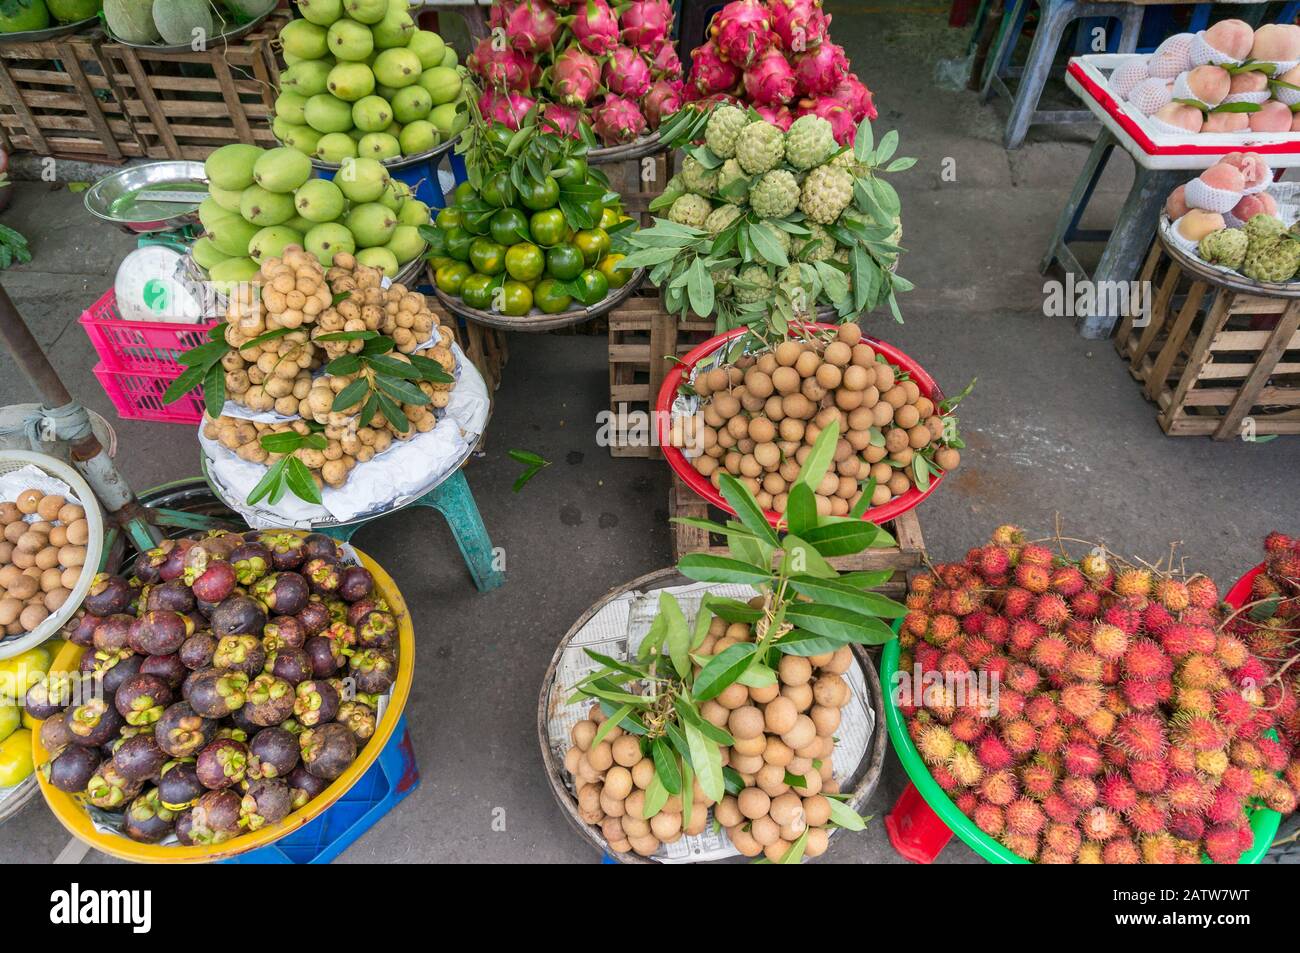 Tropical fruits on sale on street market stall in Vietnam Stock Photo